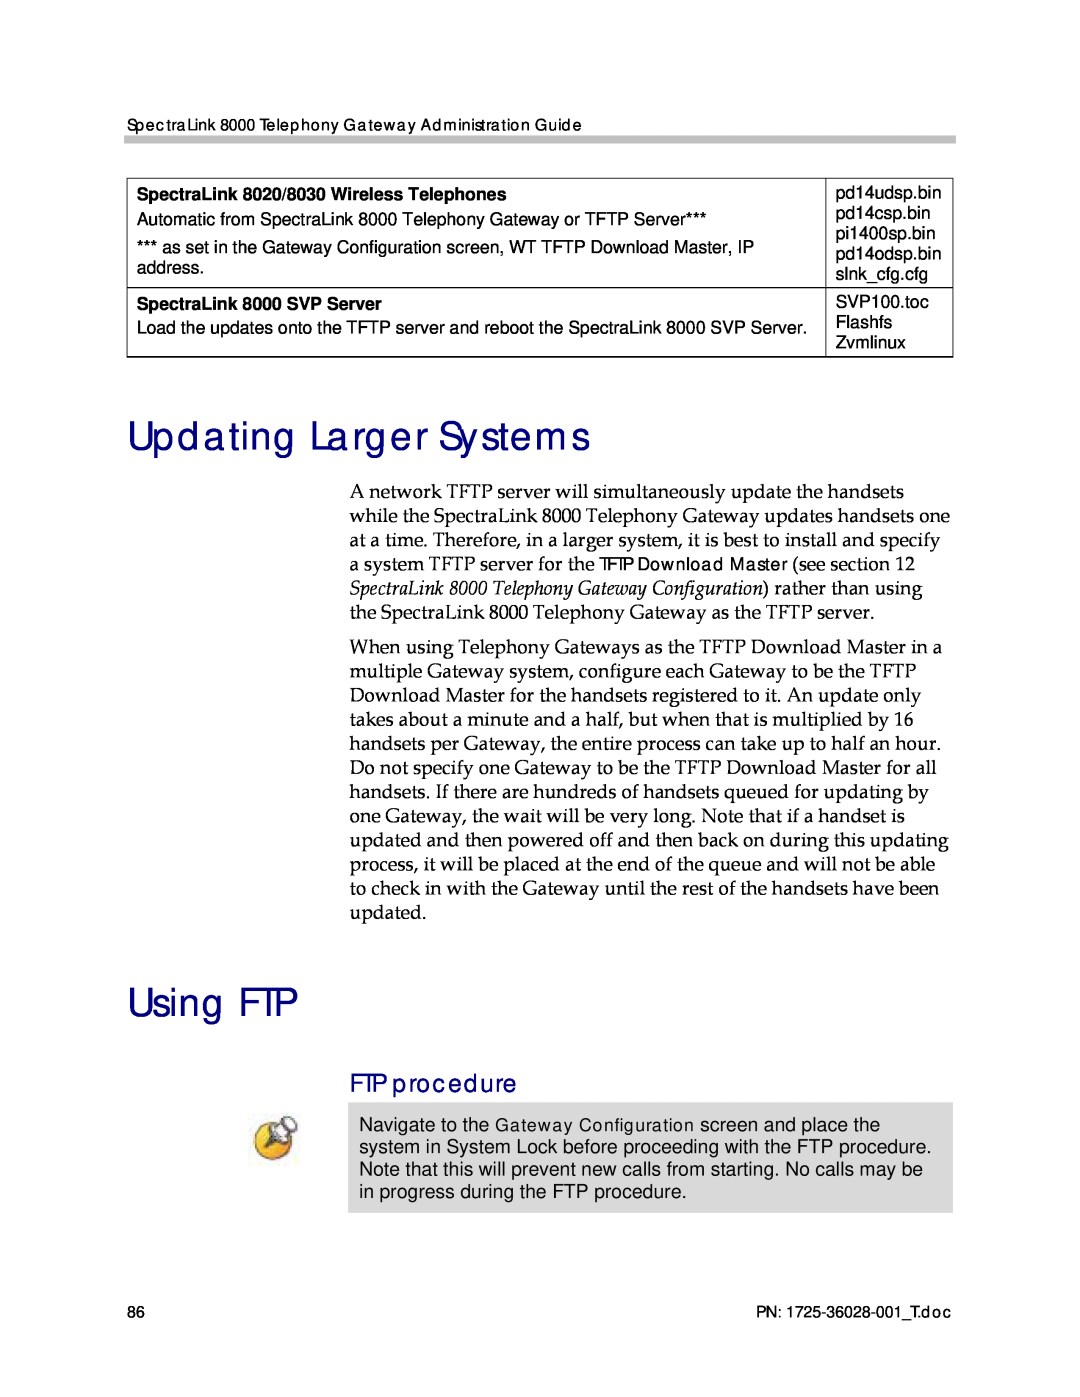 Polycom 1725-36028-001 manual Updating Larger Systems, Using FTP, FTP procedure 